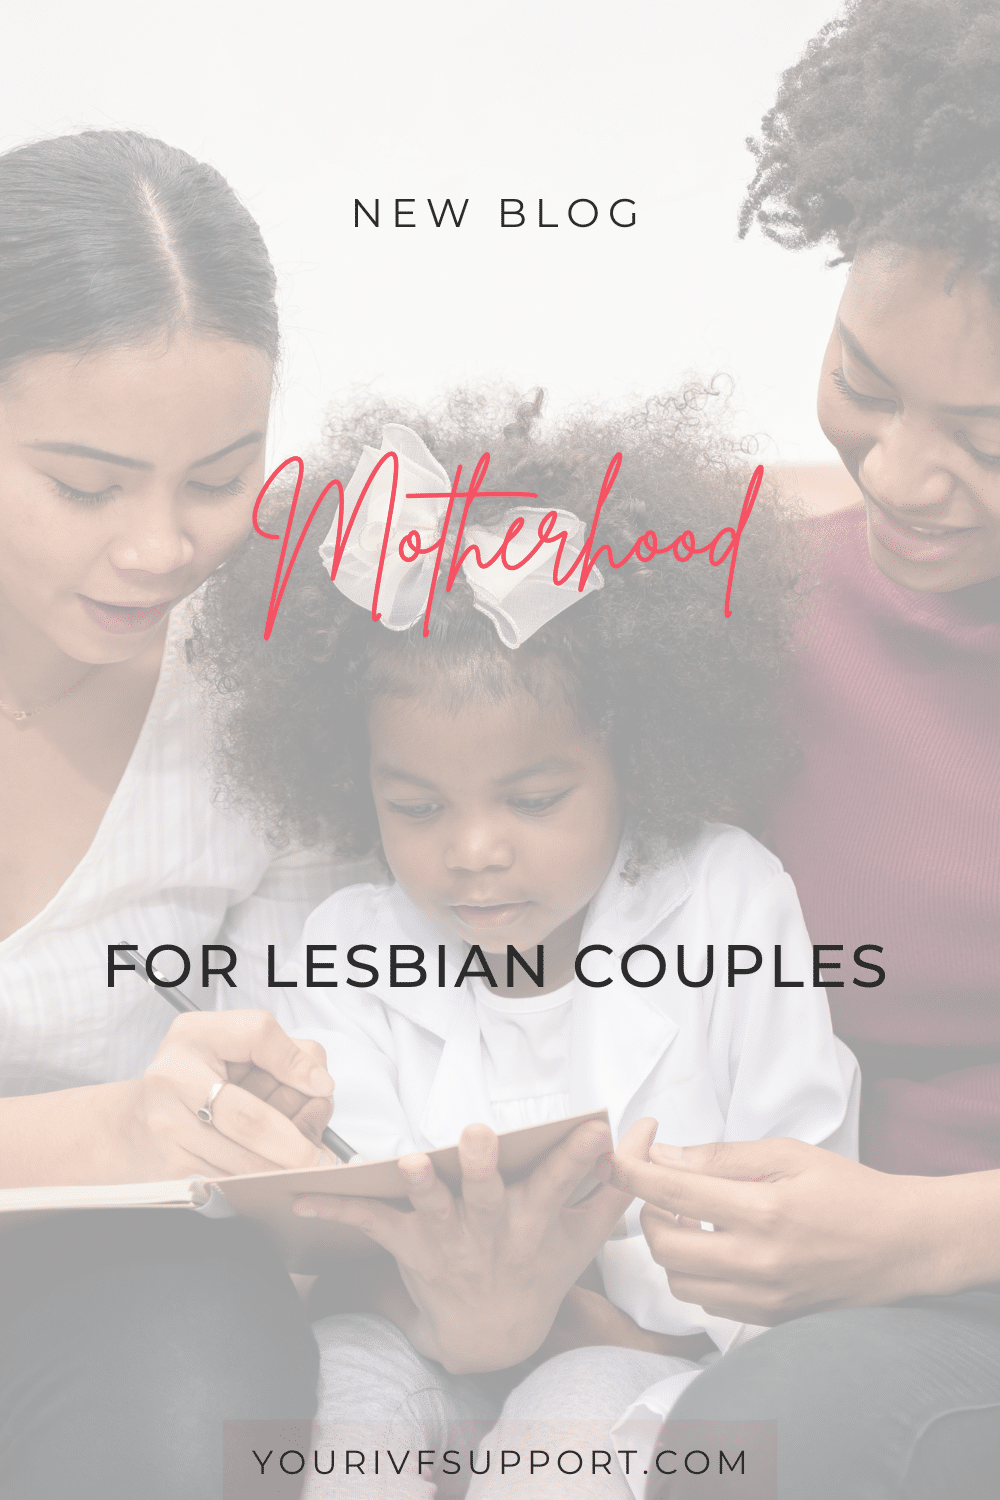 Having Children for Lesbian Couples: Options and Consideration